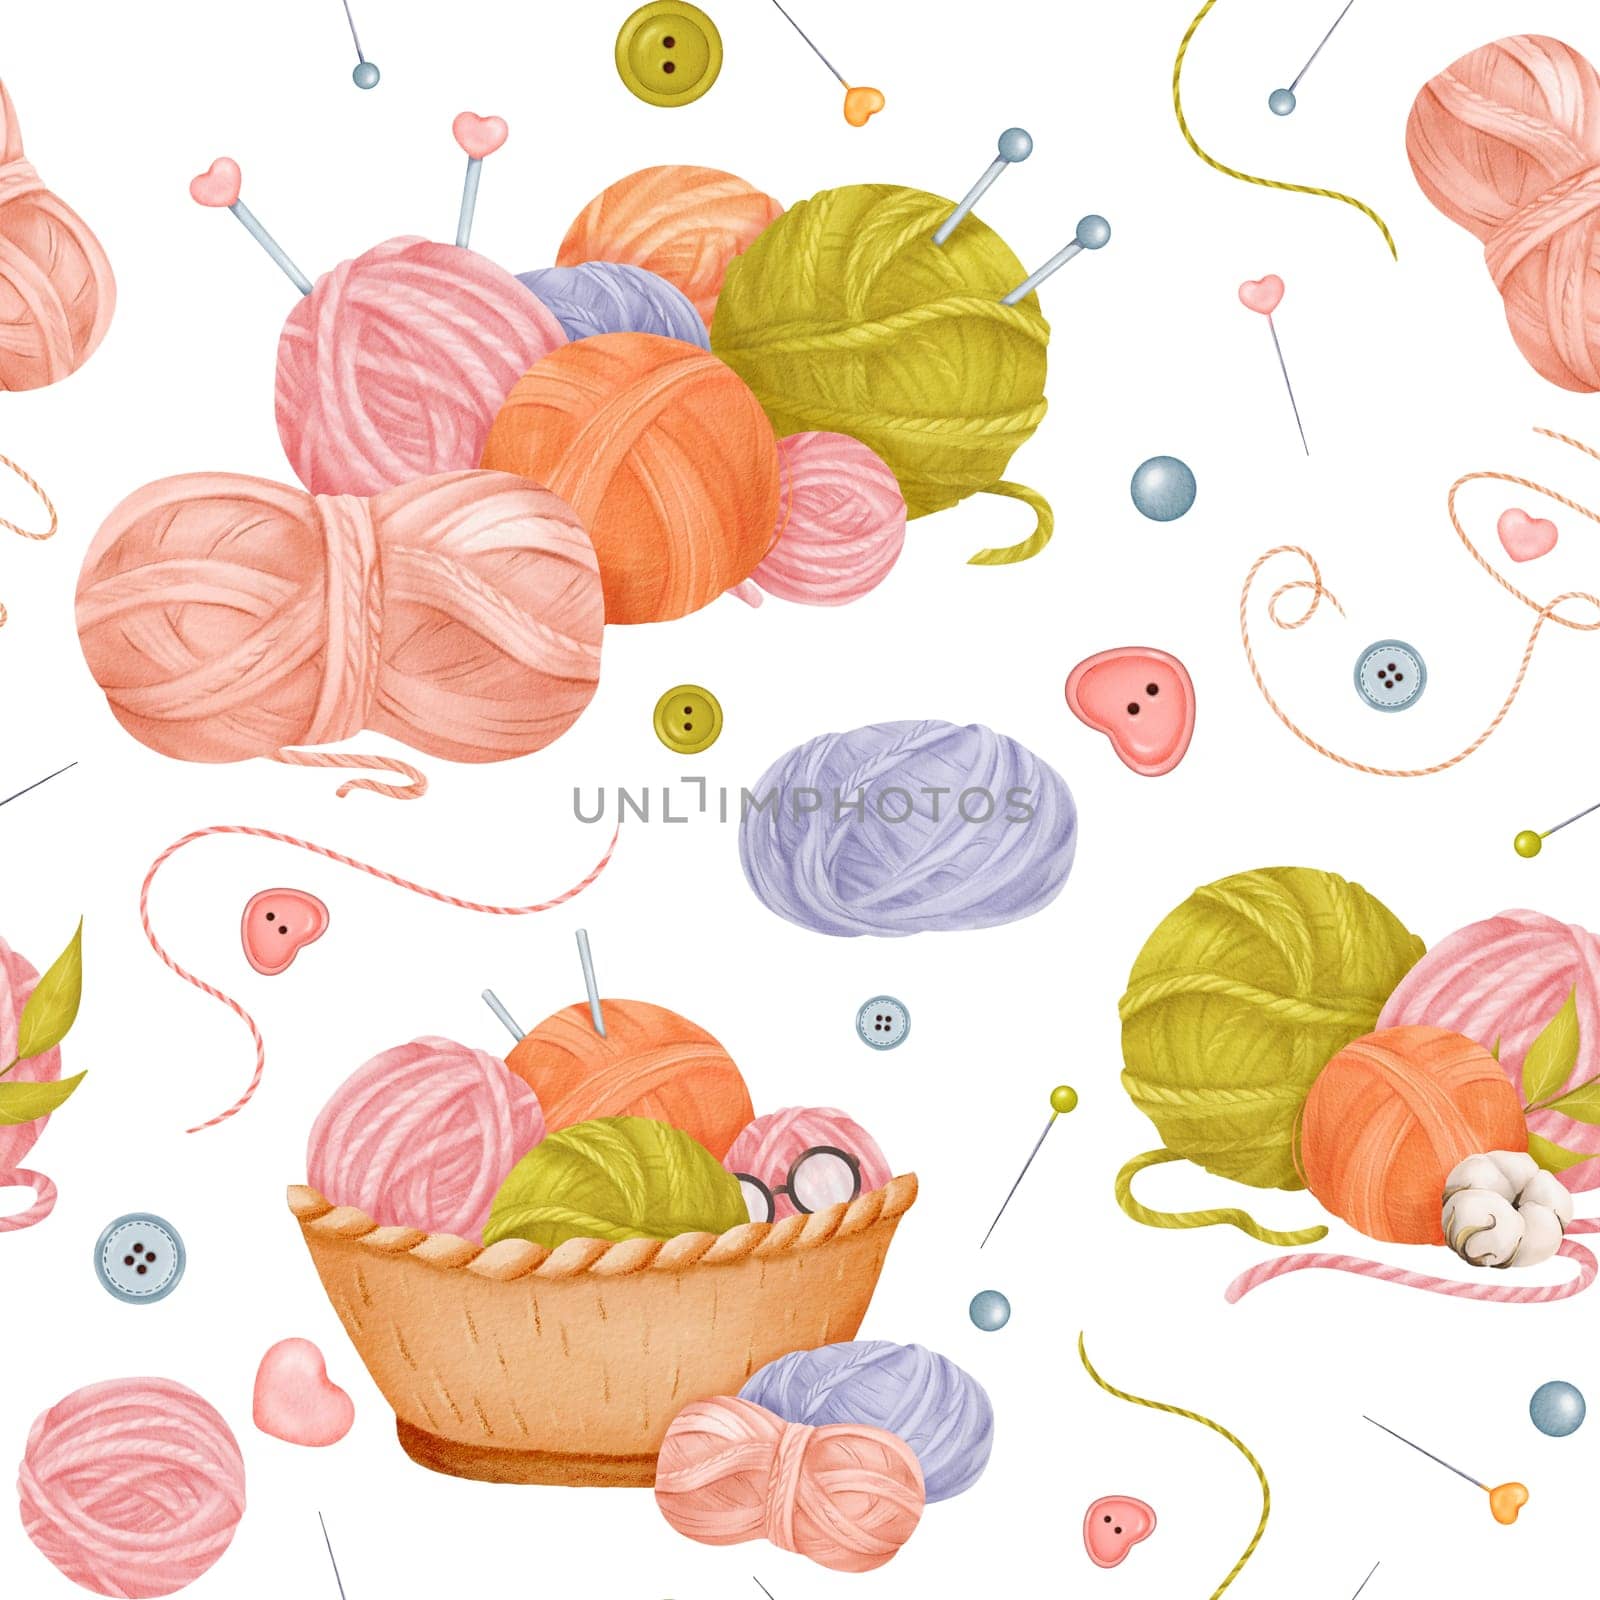 A seamless crafting-themed pattern yarn skeins in a woven basket, cotton flowers, colorful buttons, sewing needles with threads, and knitting needles. watercolor children illustration by Art_Mari_Ka